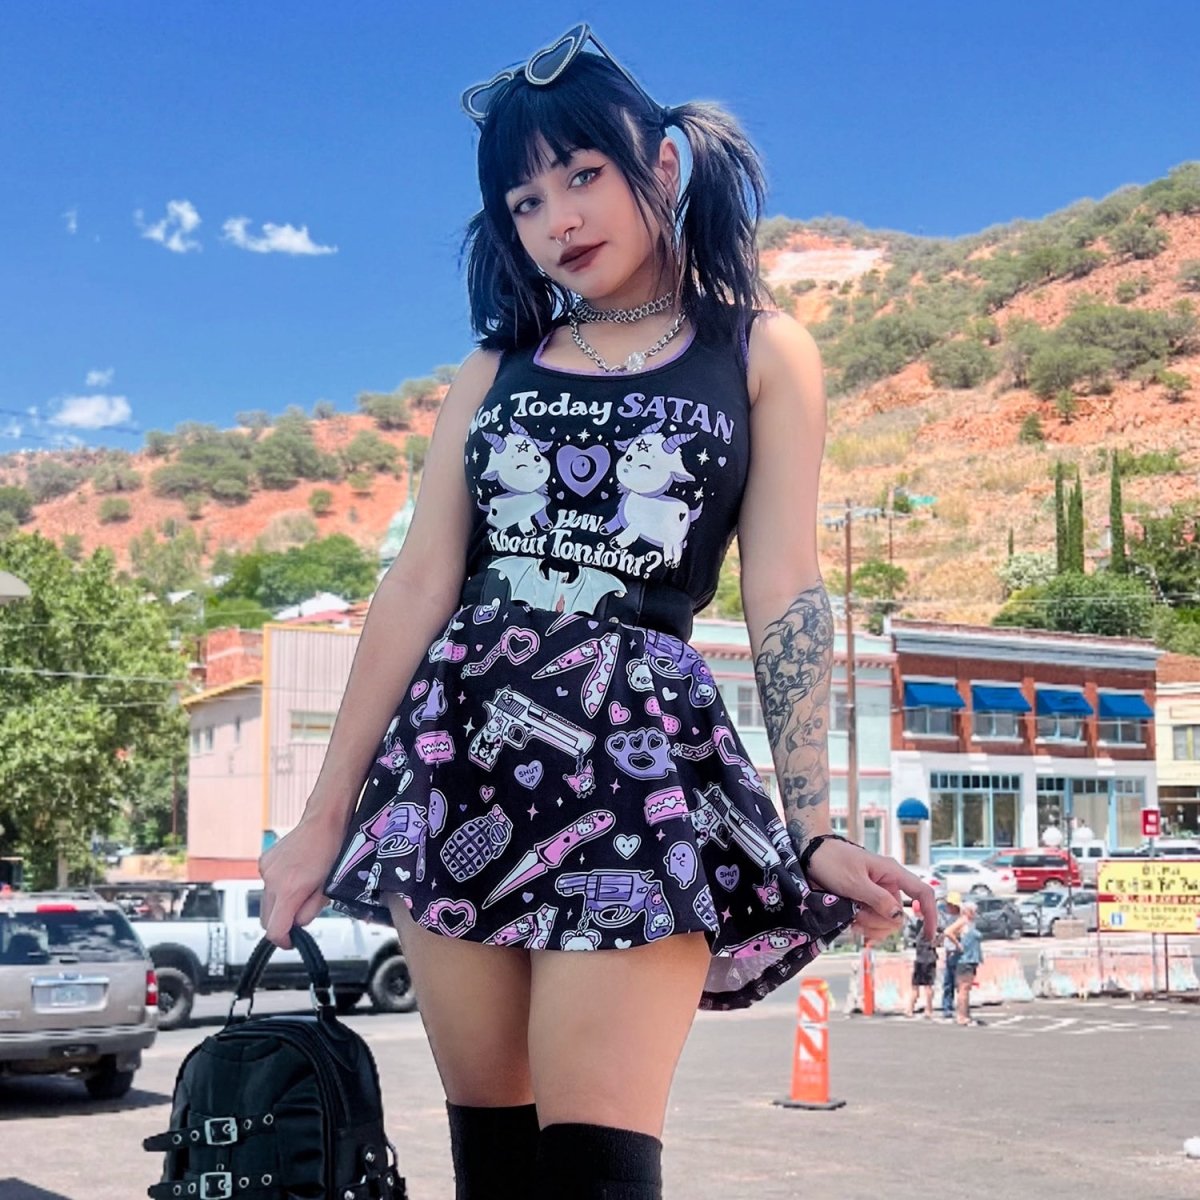 the pastel goth girl